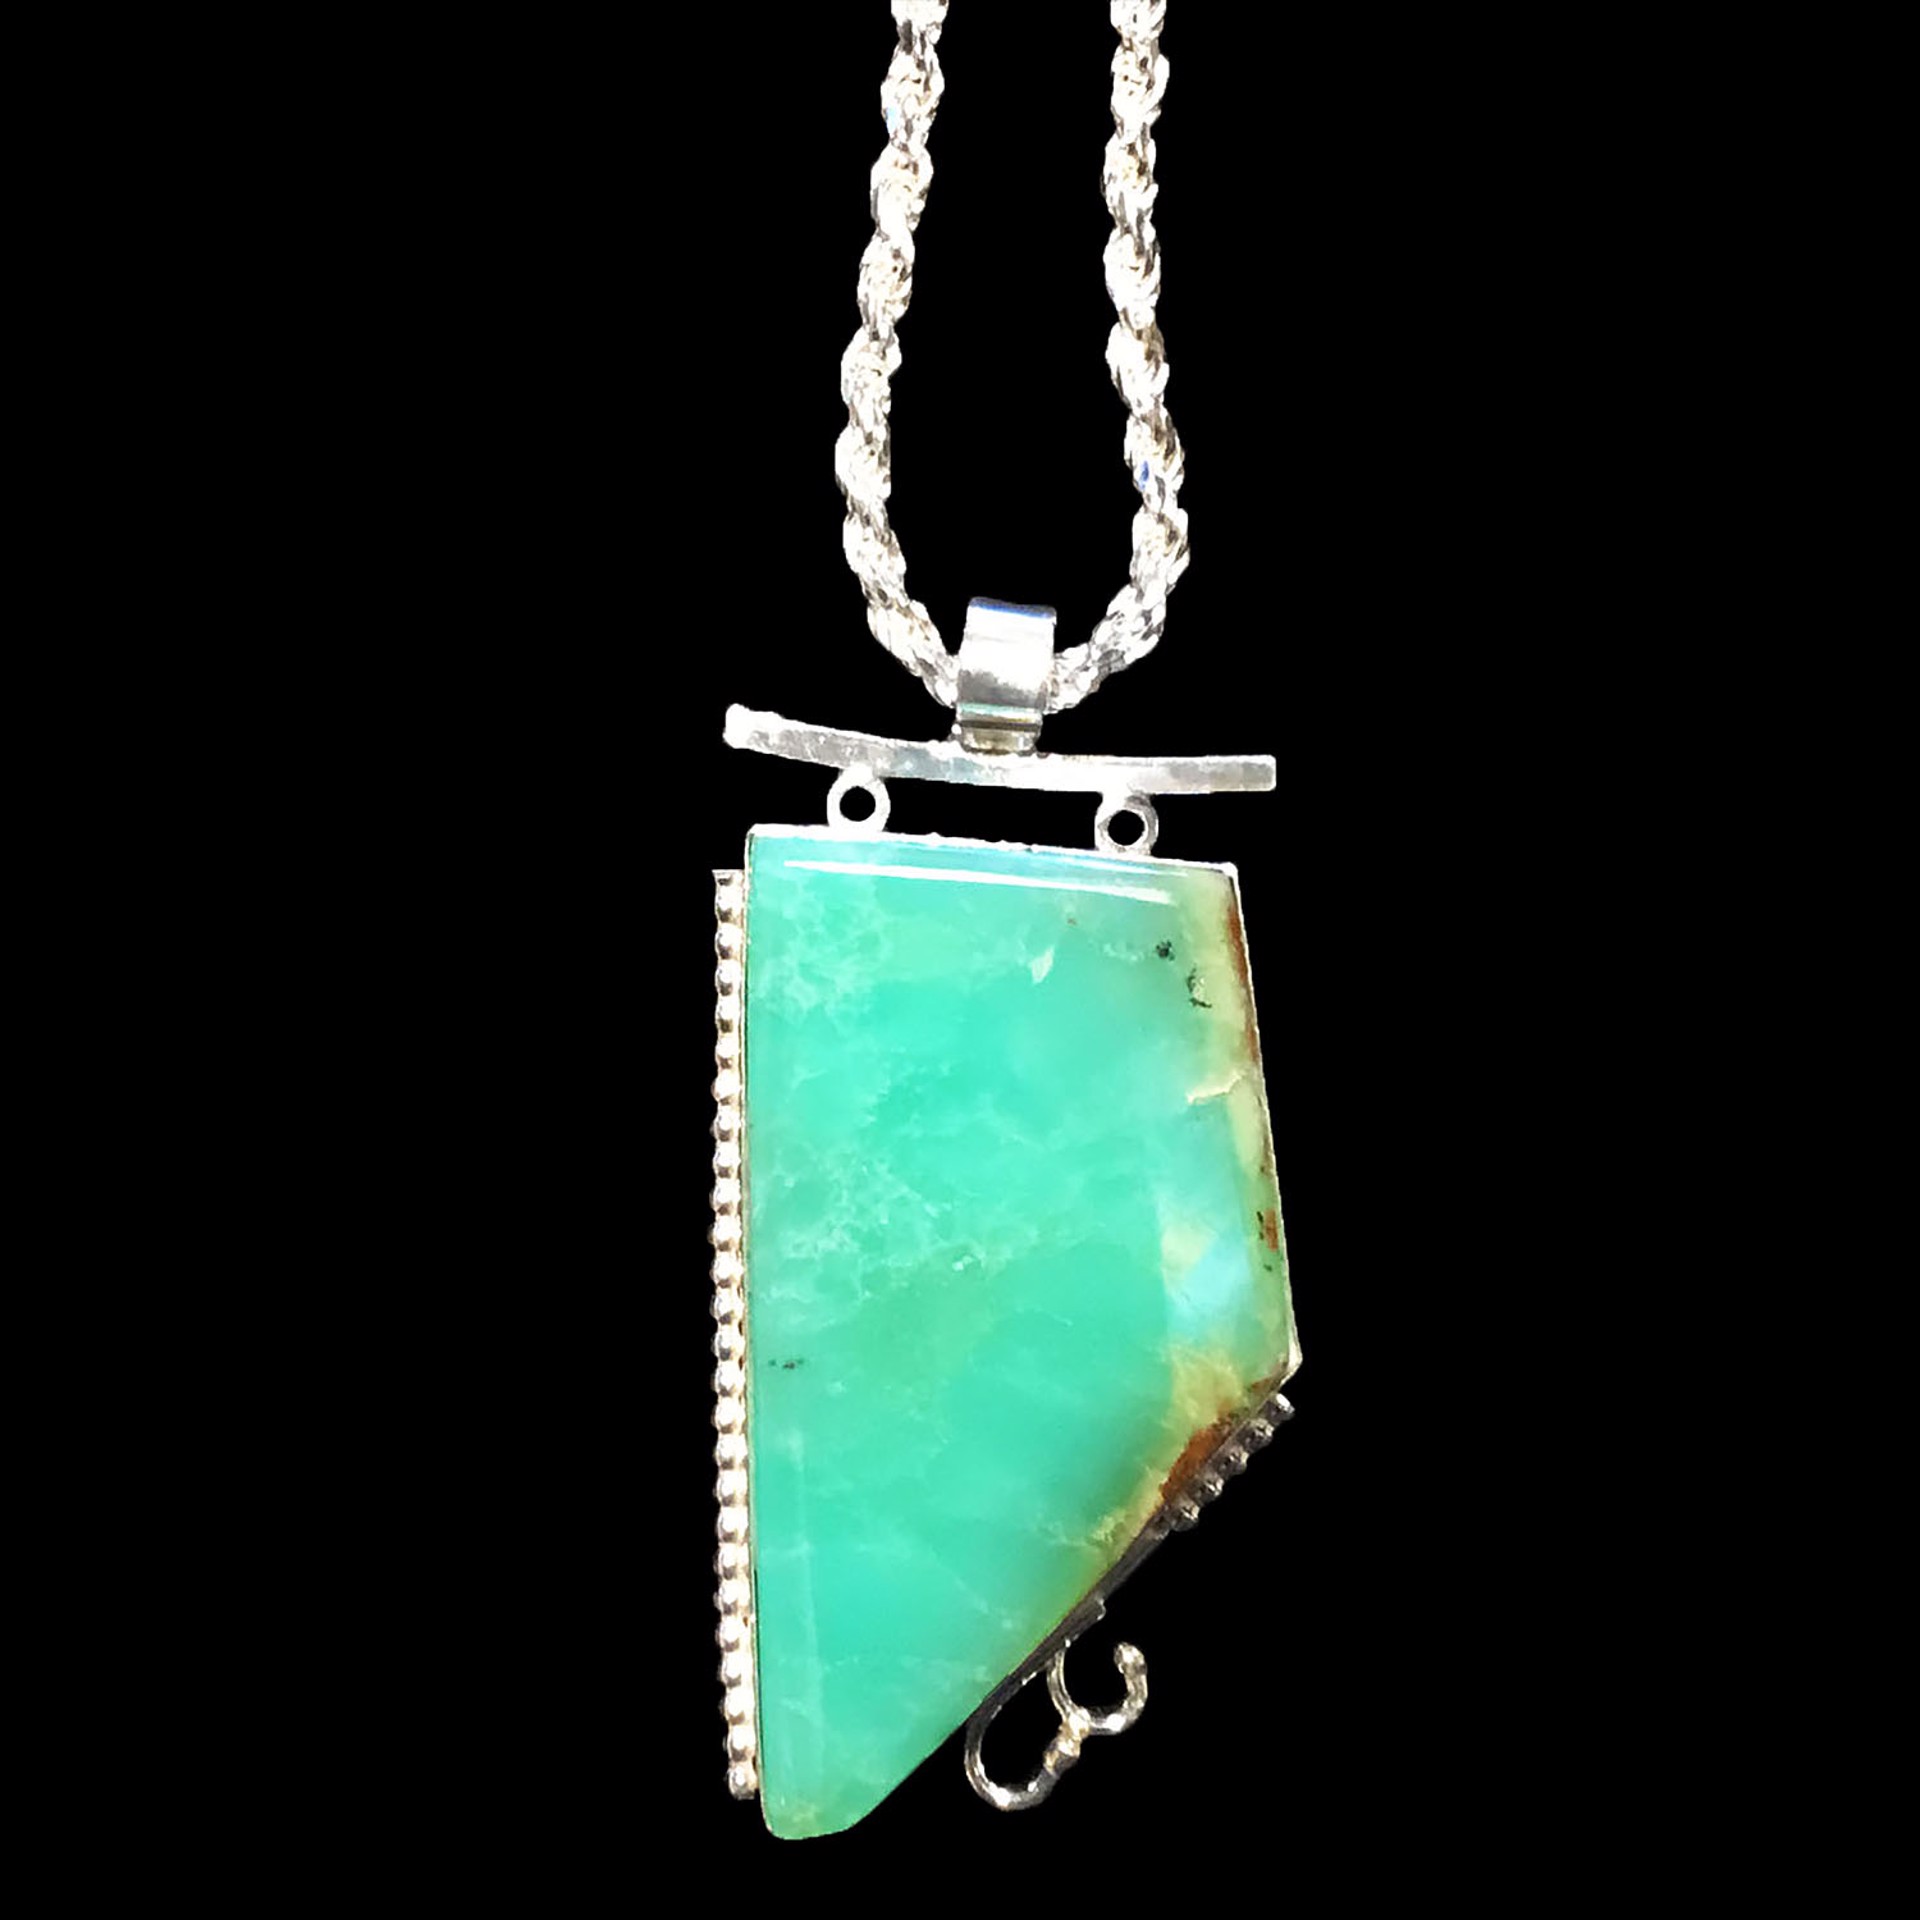 Chrysoprase and Sterling Silver Necklace by Michael Redhawk